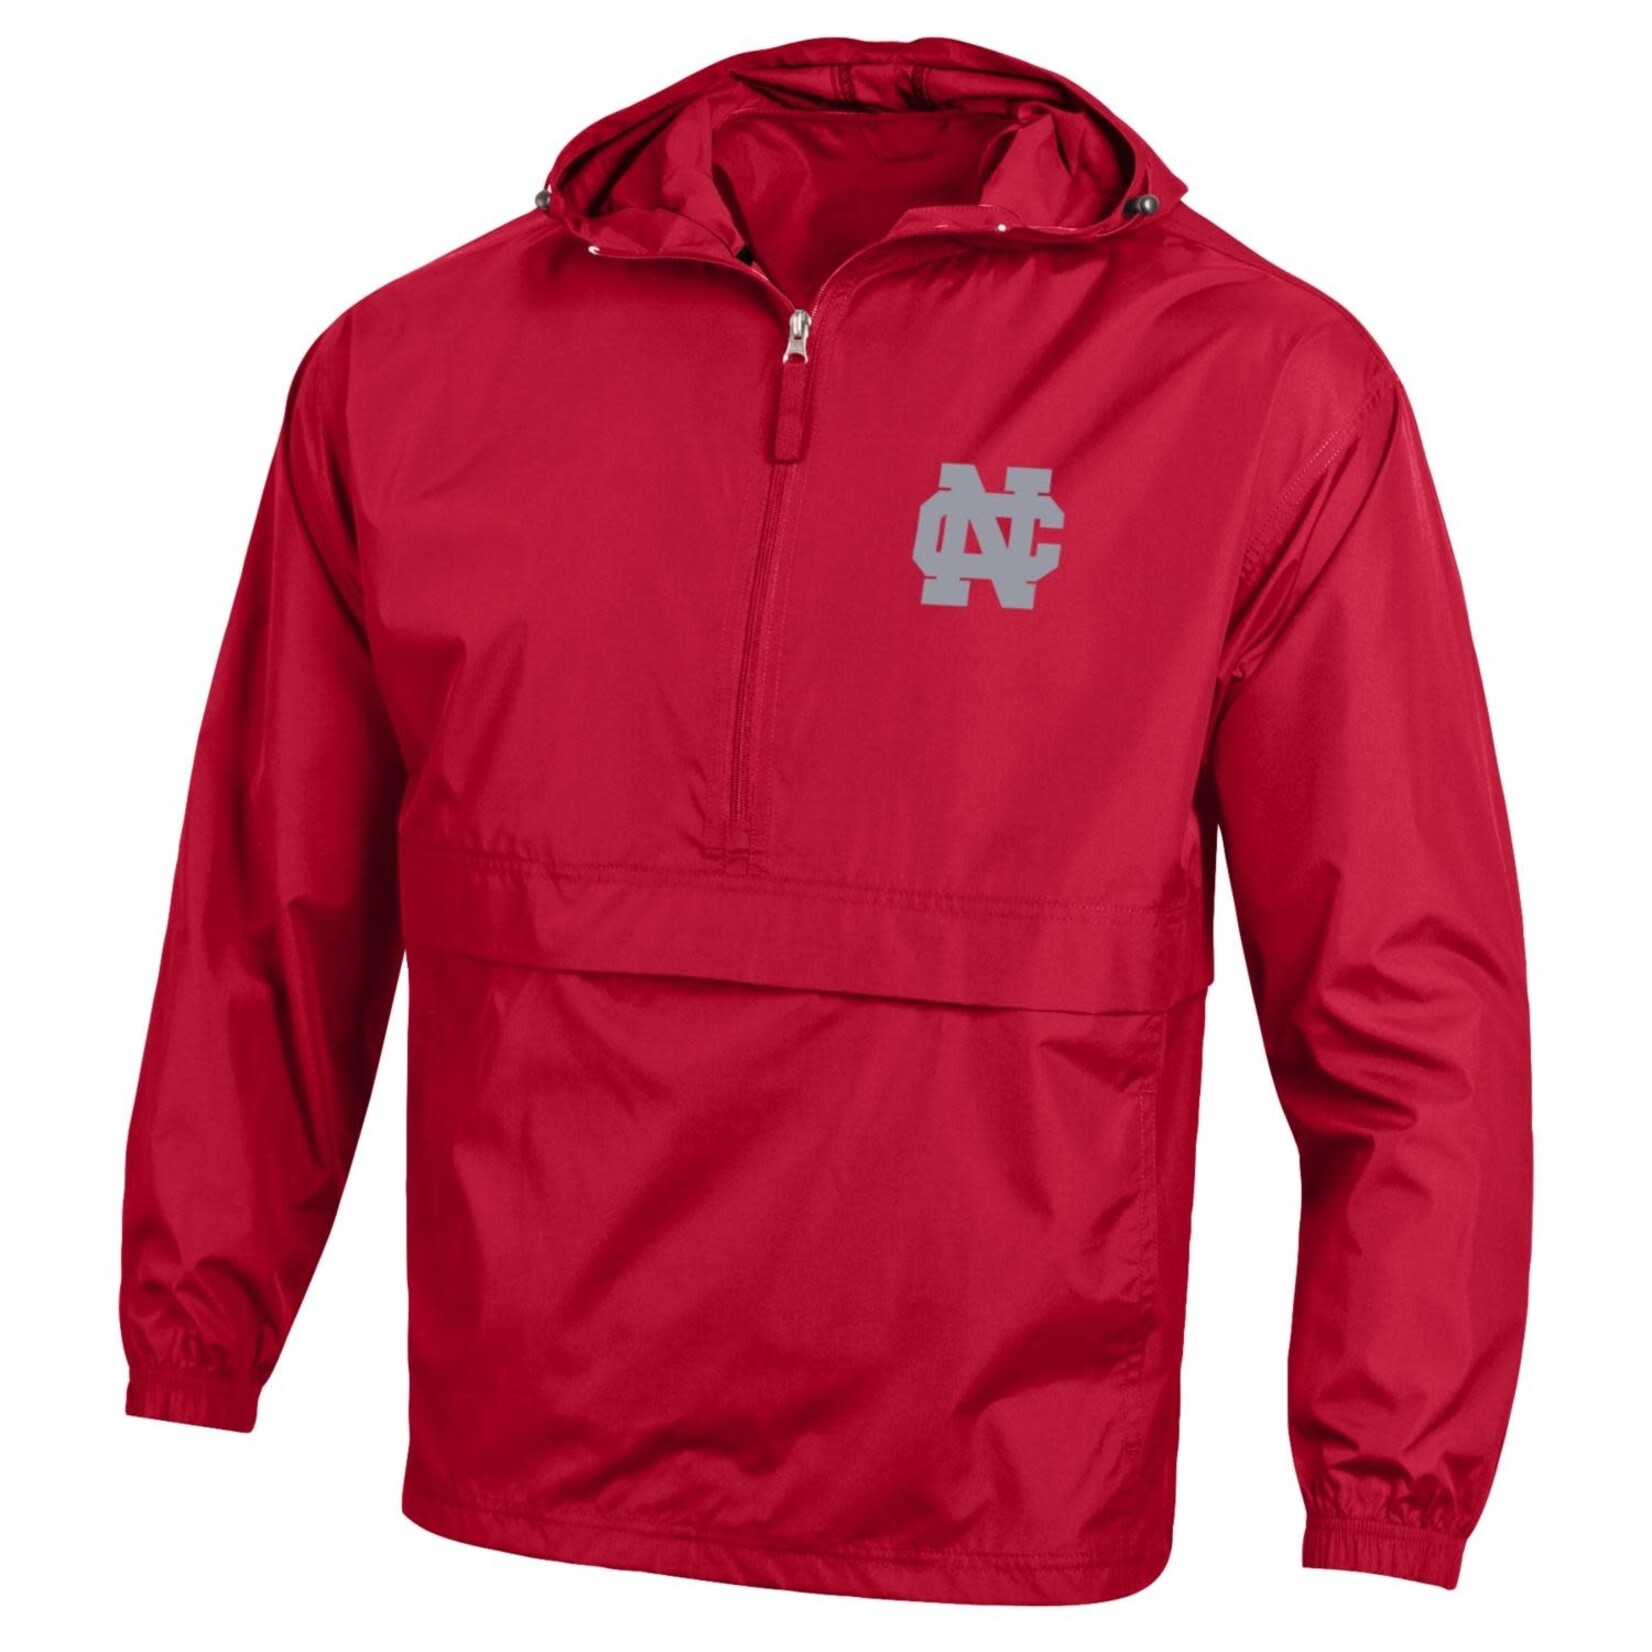 Champion North Central College Pack and Go Jacket w/ Back Graphic